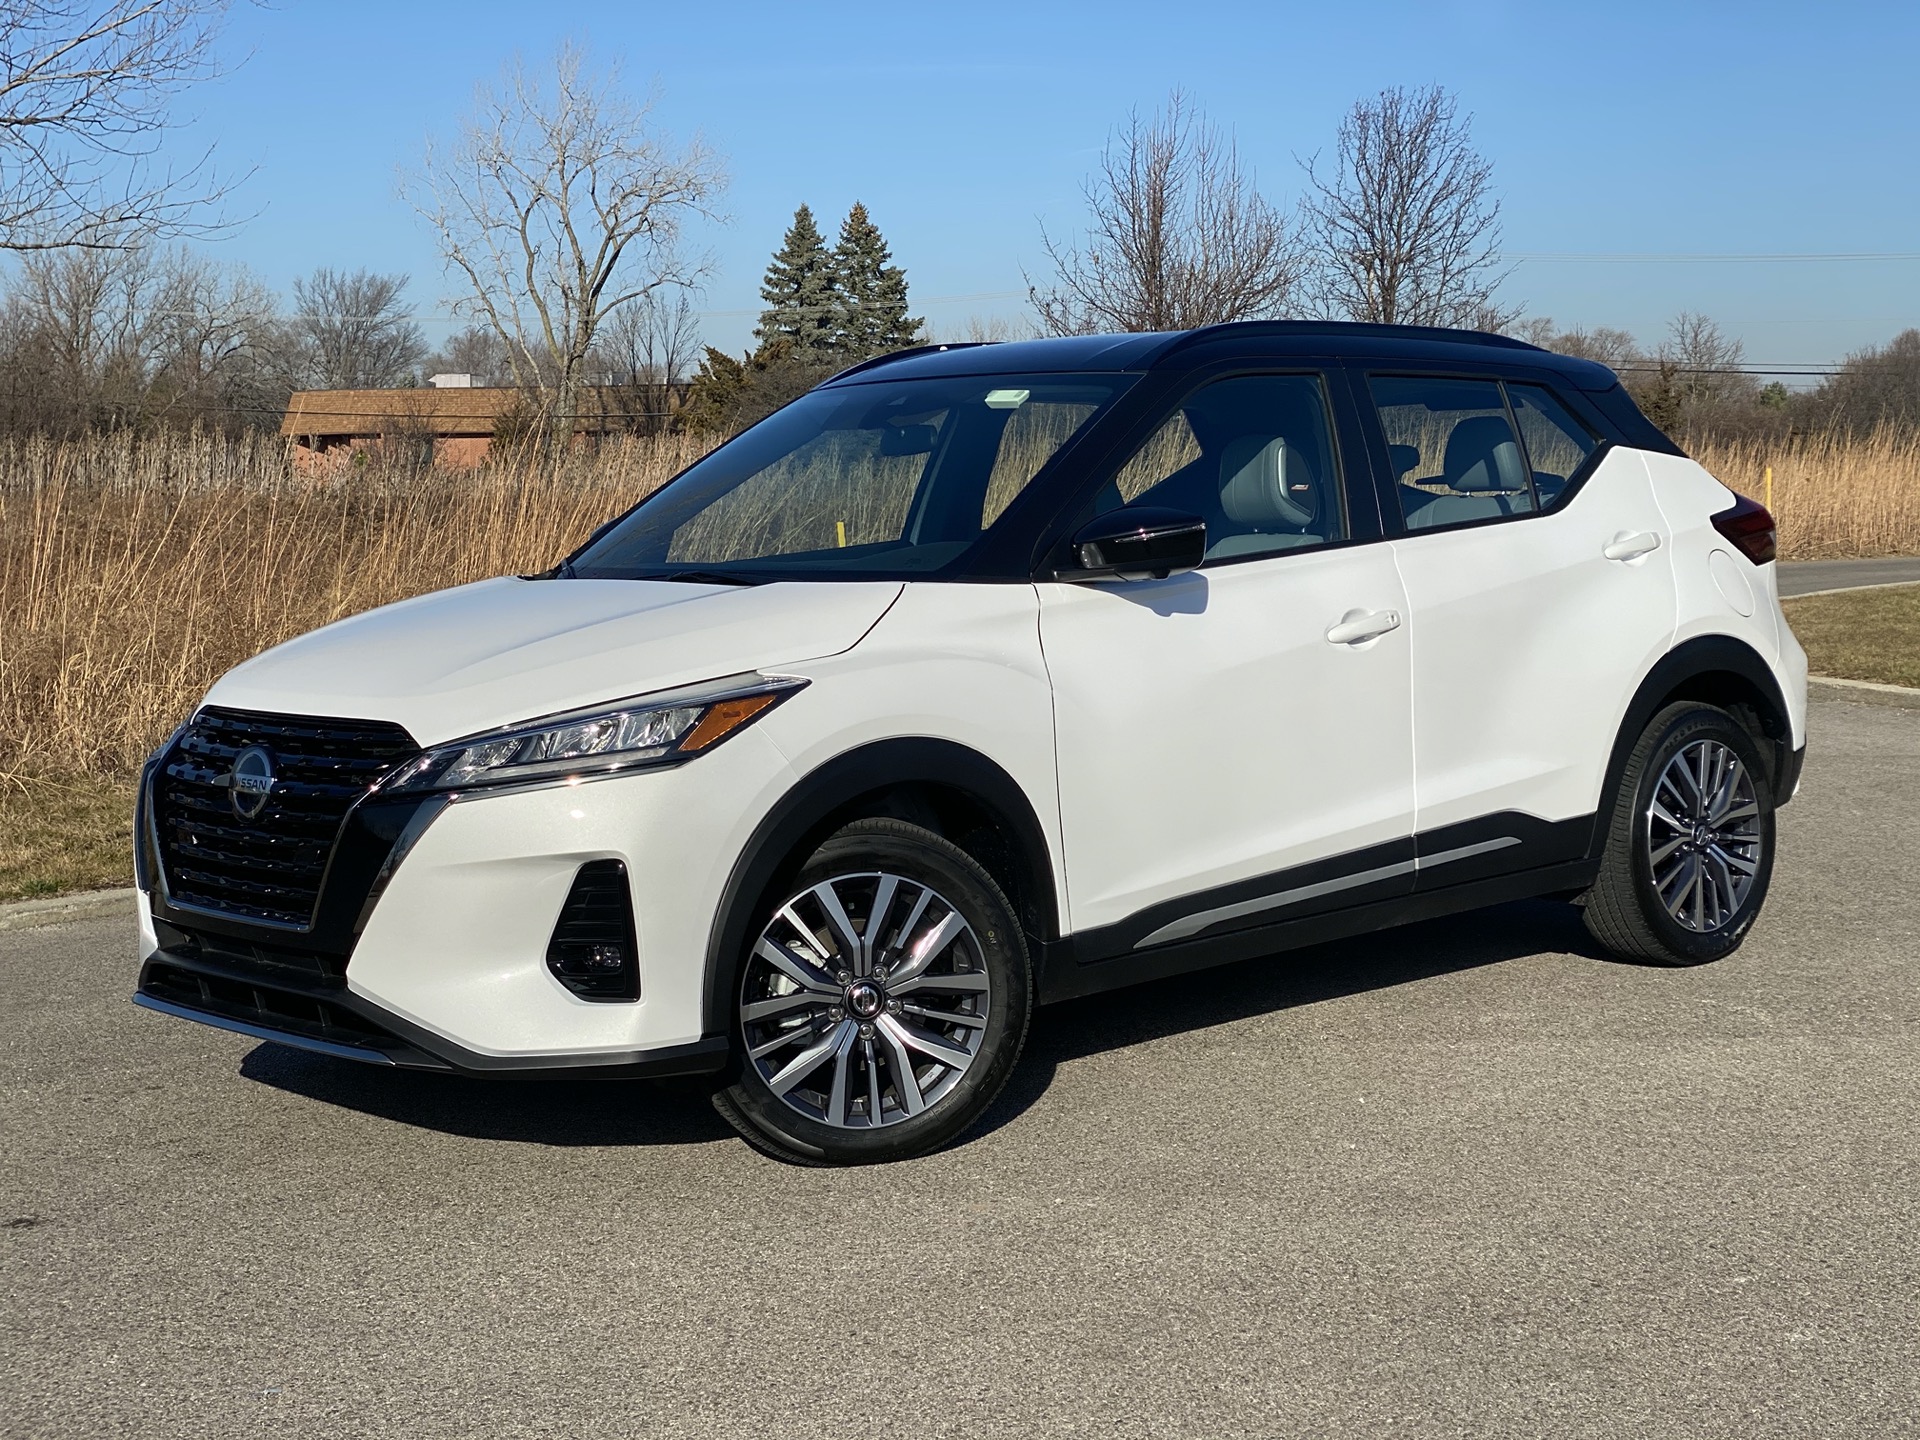 New And Used Nissan Kicks Prices Photos Reviews Specs The Car Connection